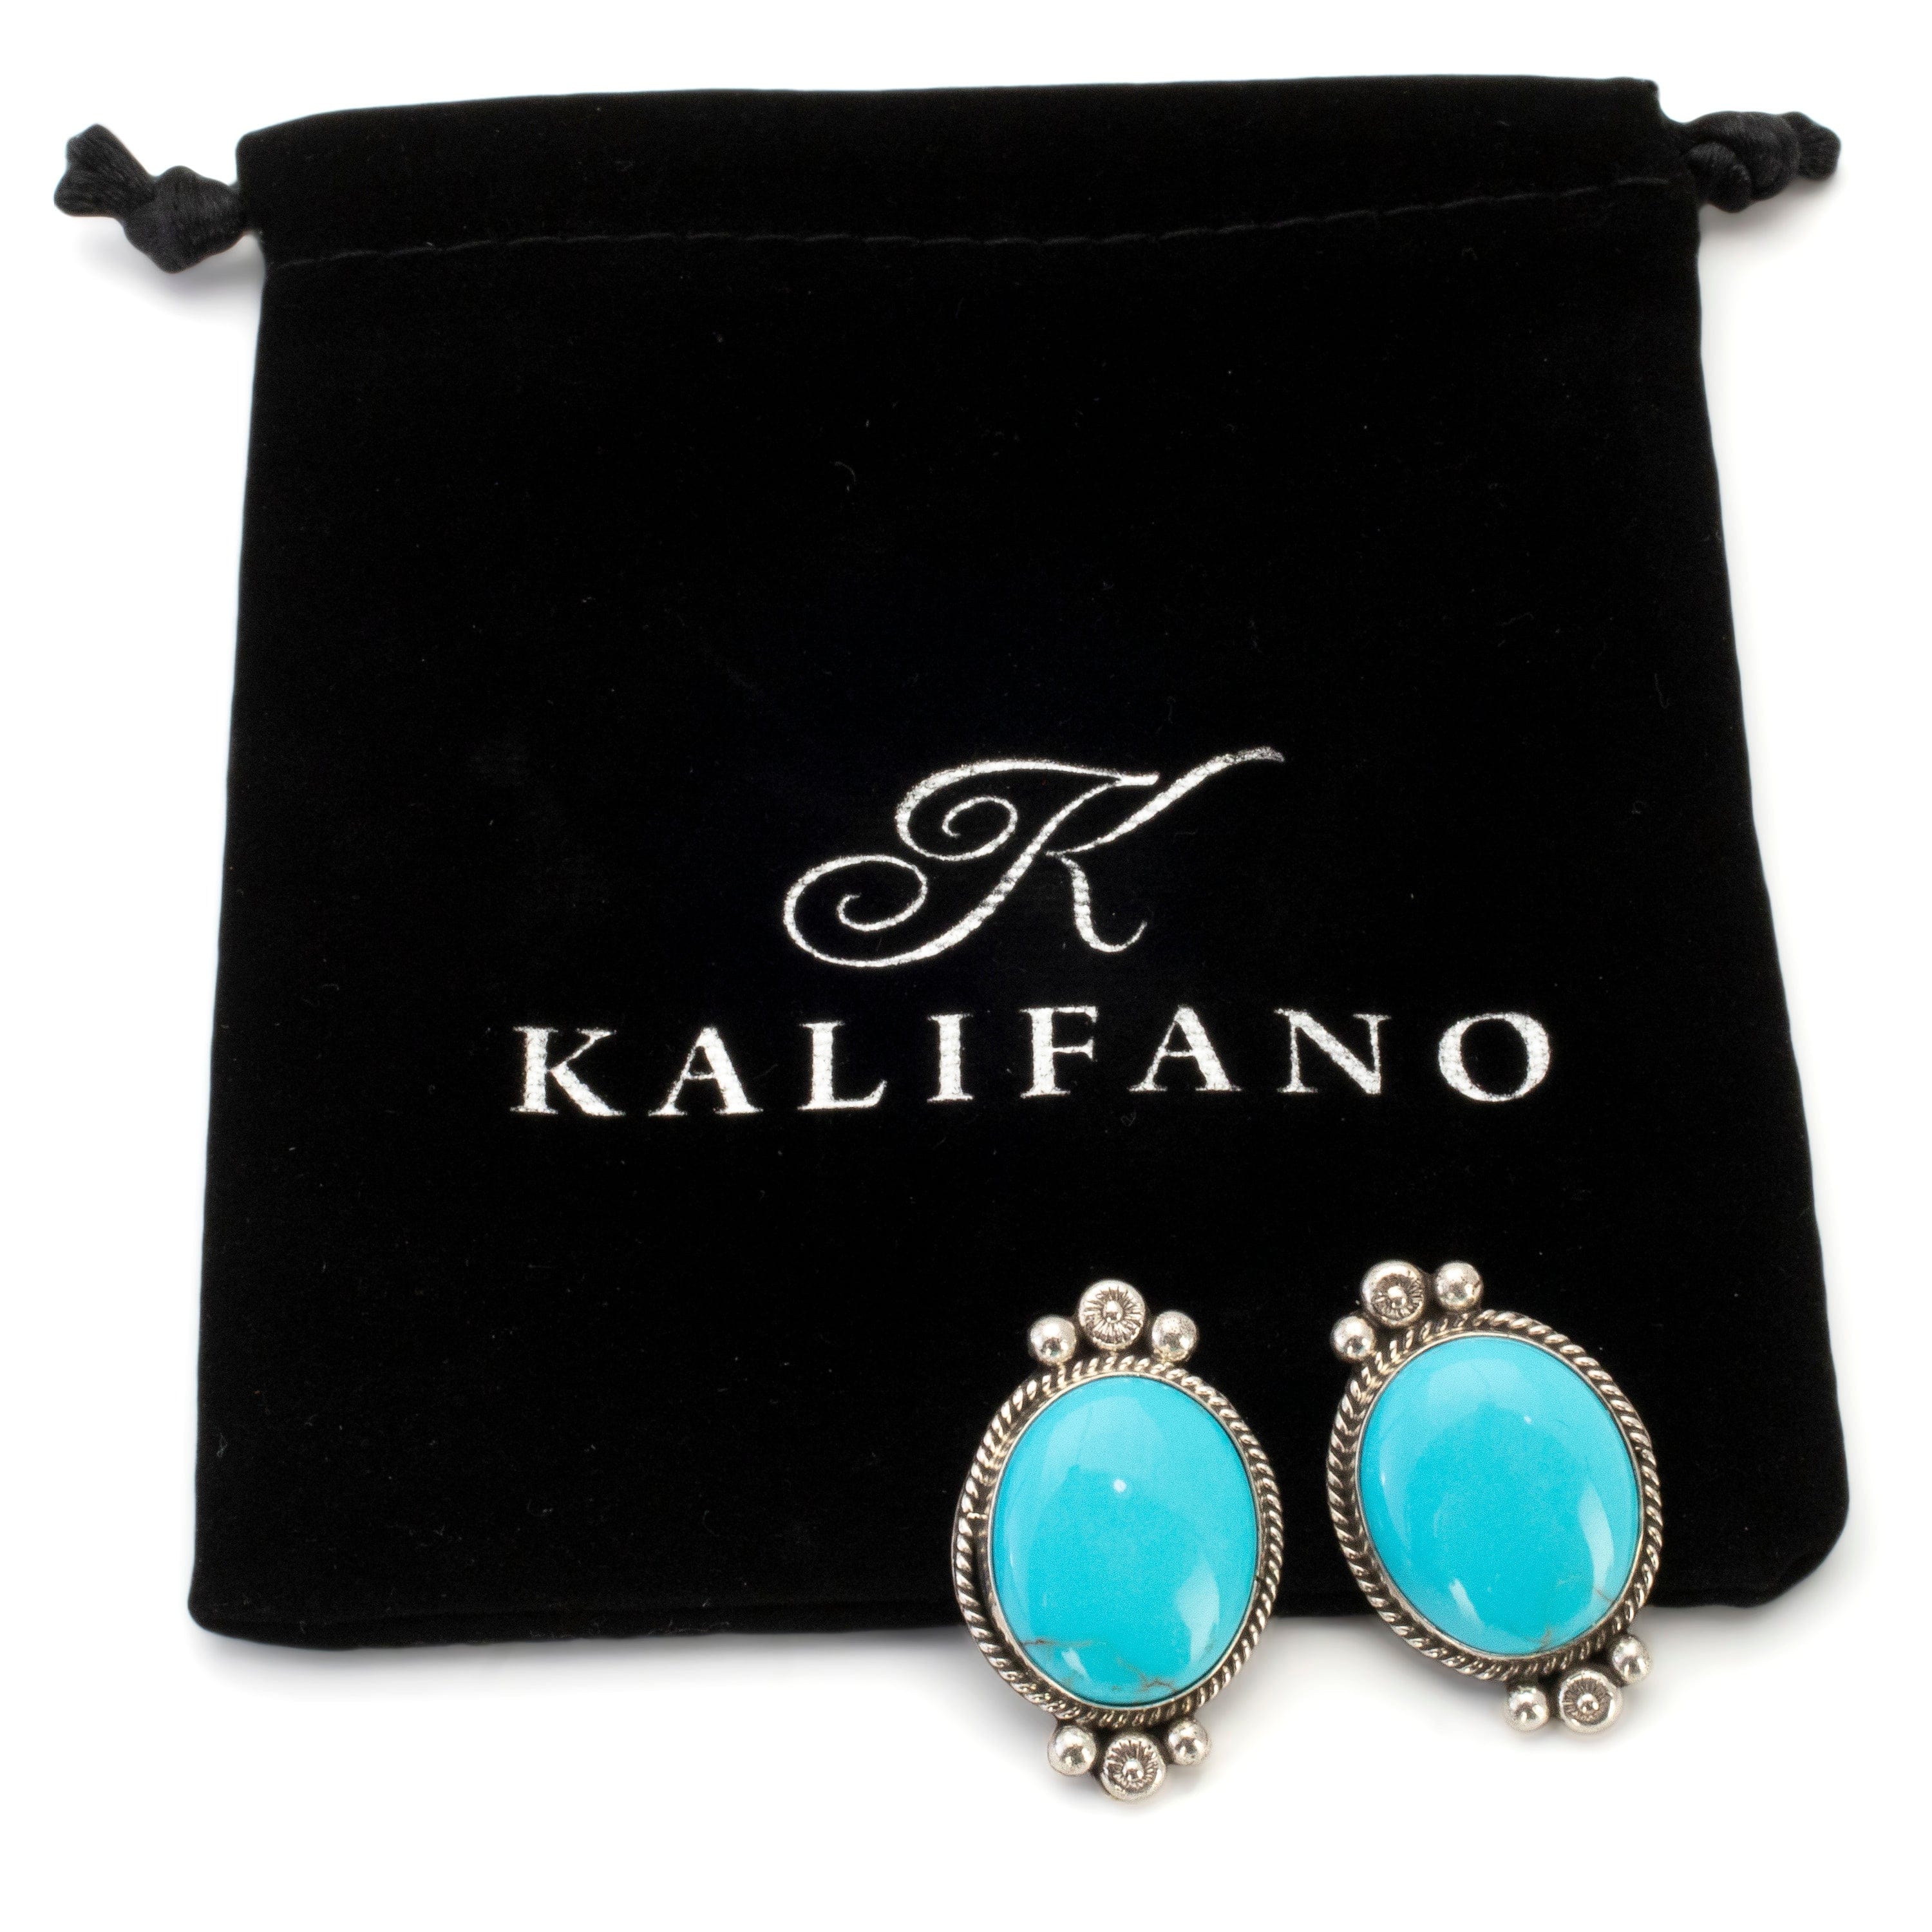 Kalifano Native American Jewelry Abellene Bah Navajo Kingman Turquoise Oval USA Native American Made 925 Sterling Silver Earrings with Stud Backing NAE600.009